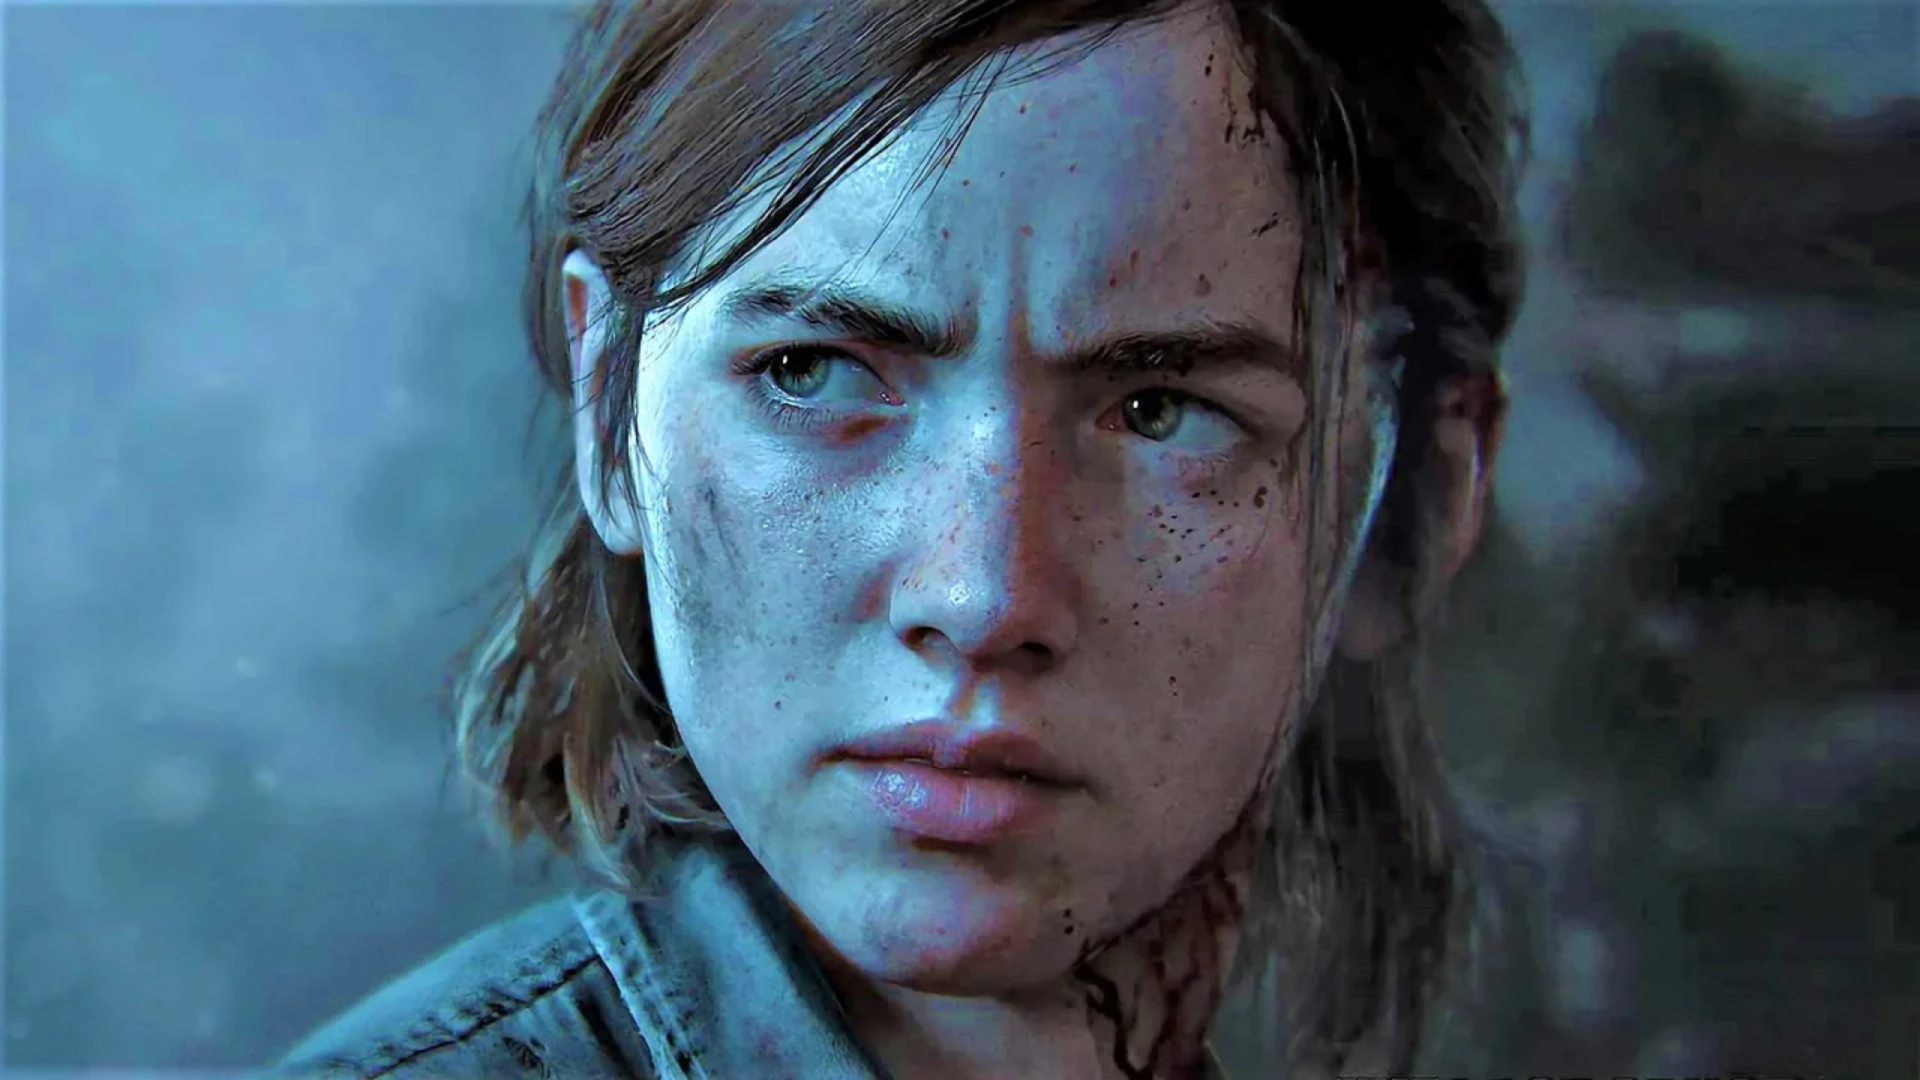 Bella Ramsey excited to explore Dina romance in The Last Of Us season 2